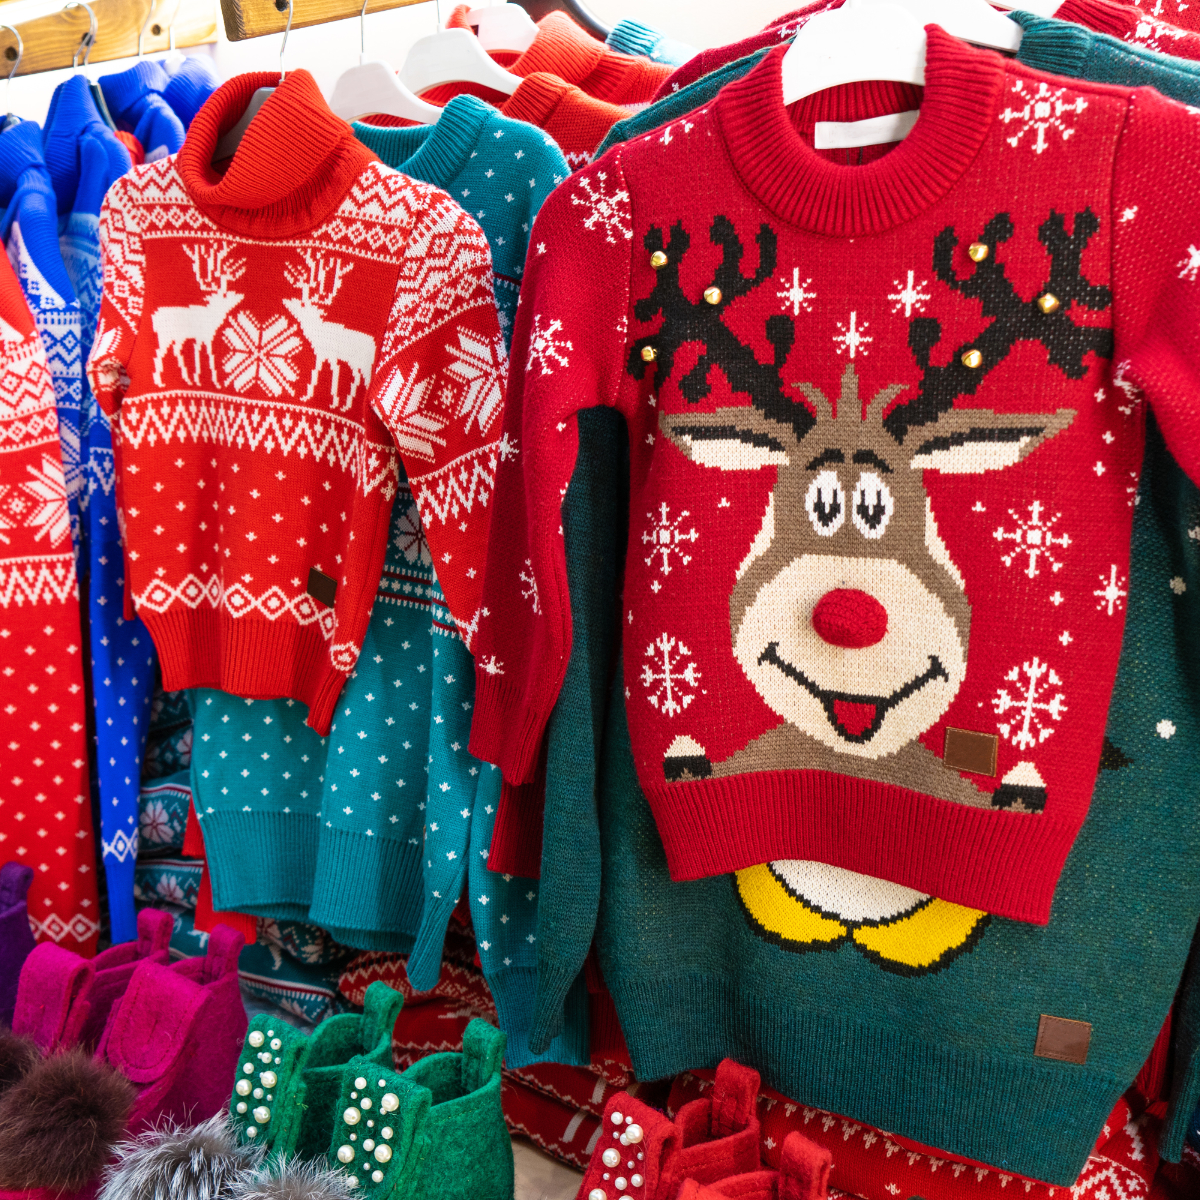 ugly holiday sweaters on display in retail shop